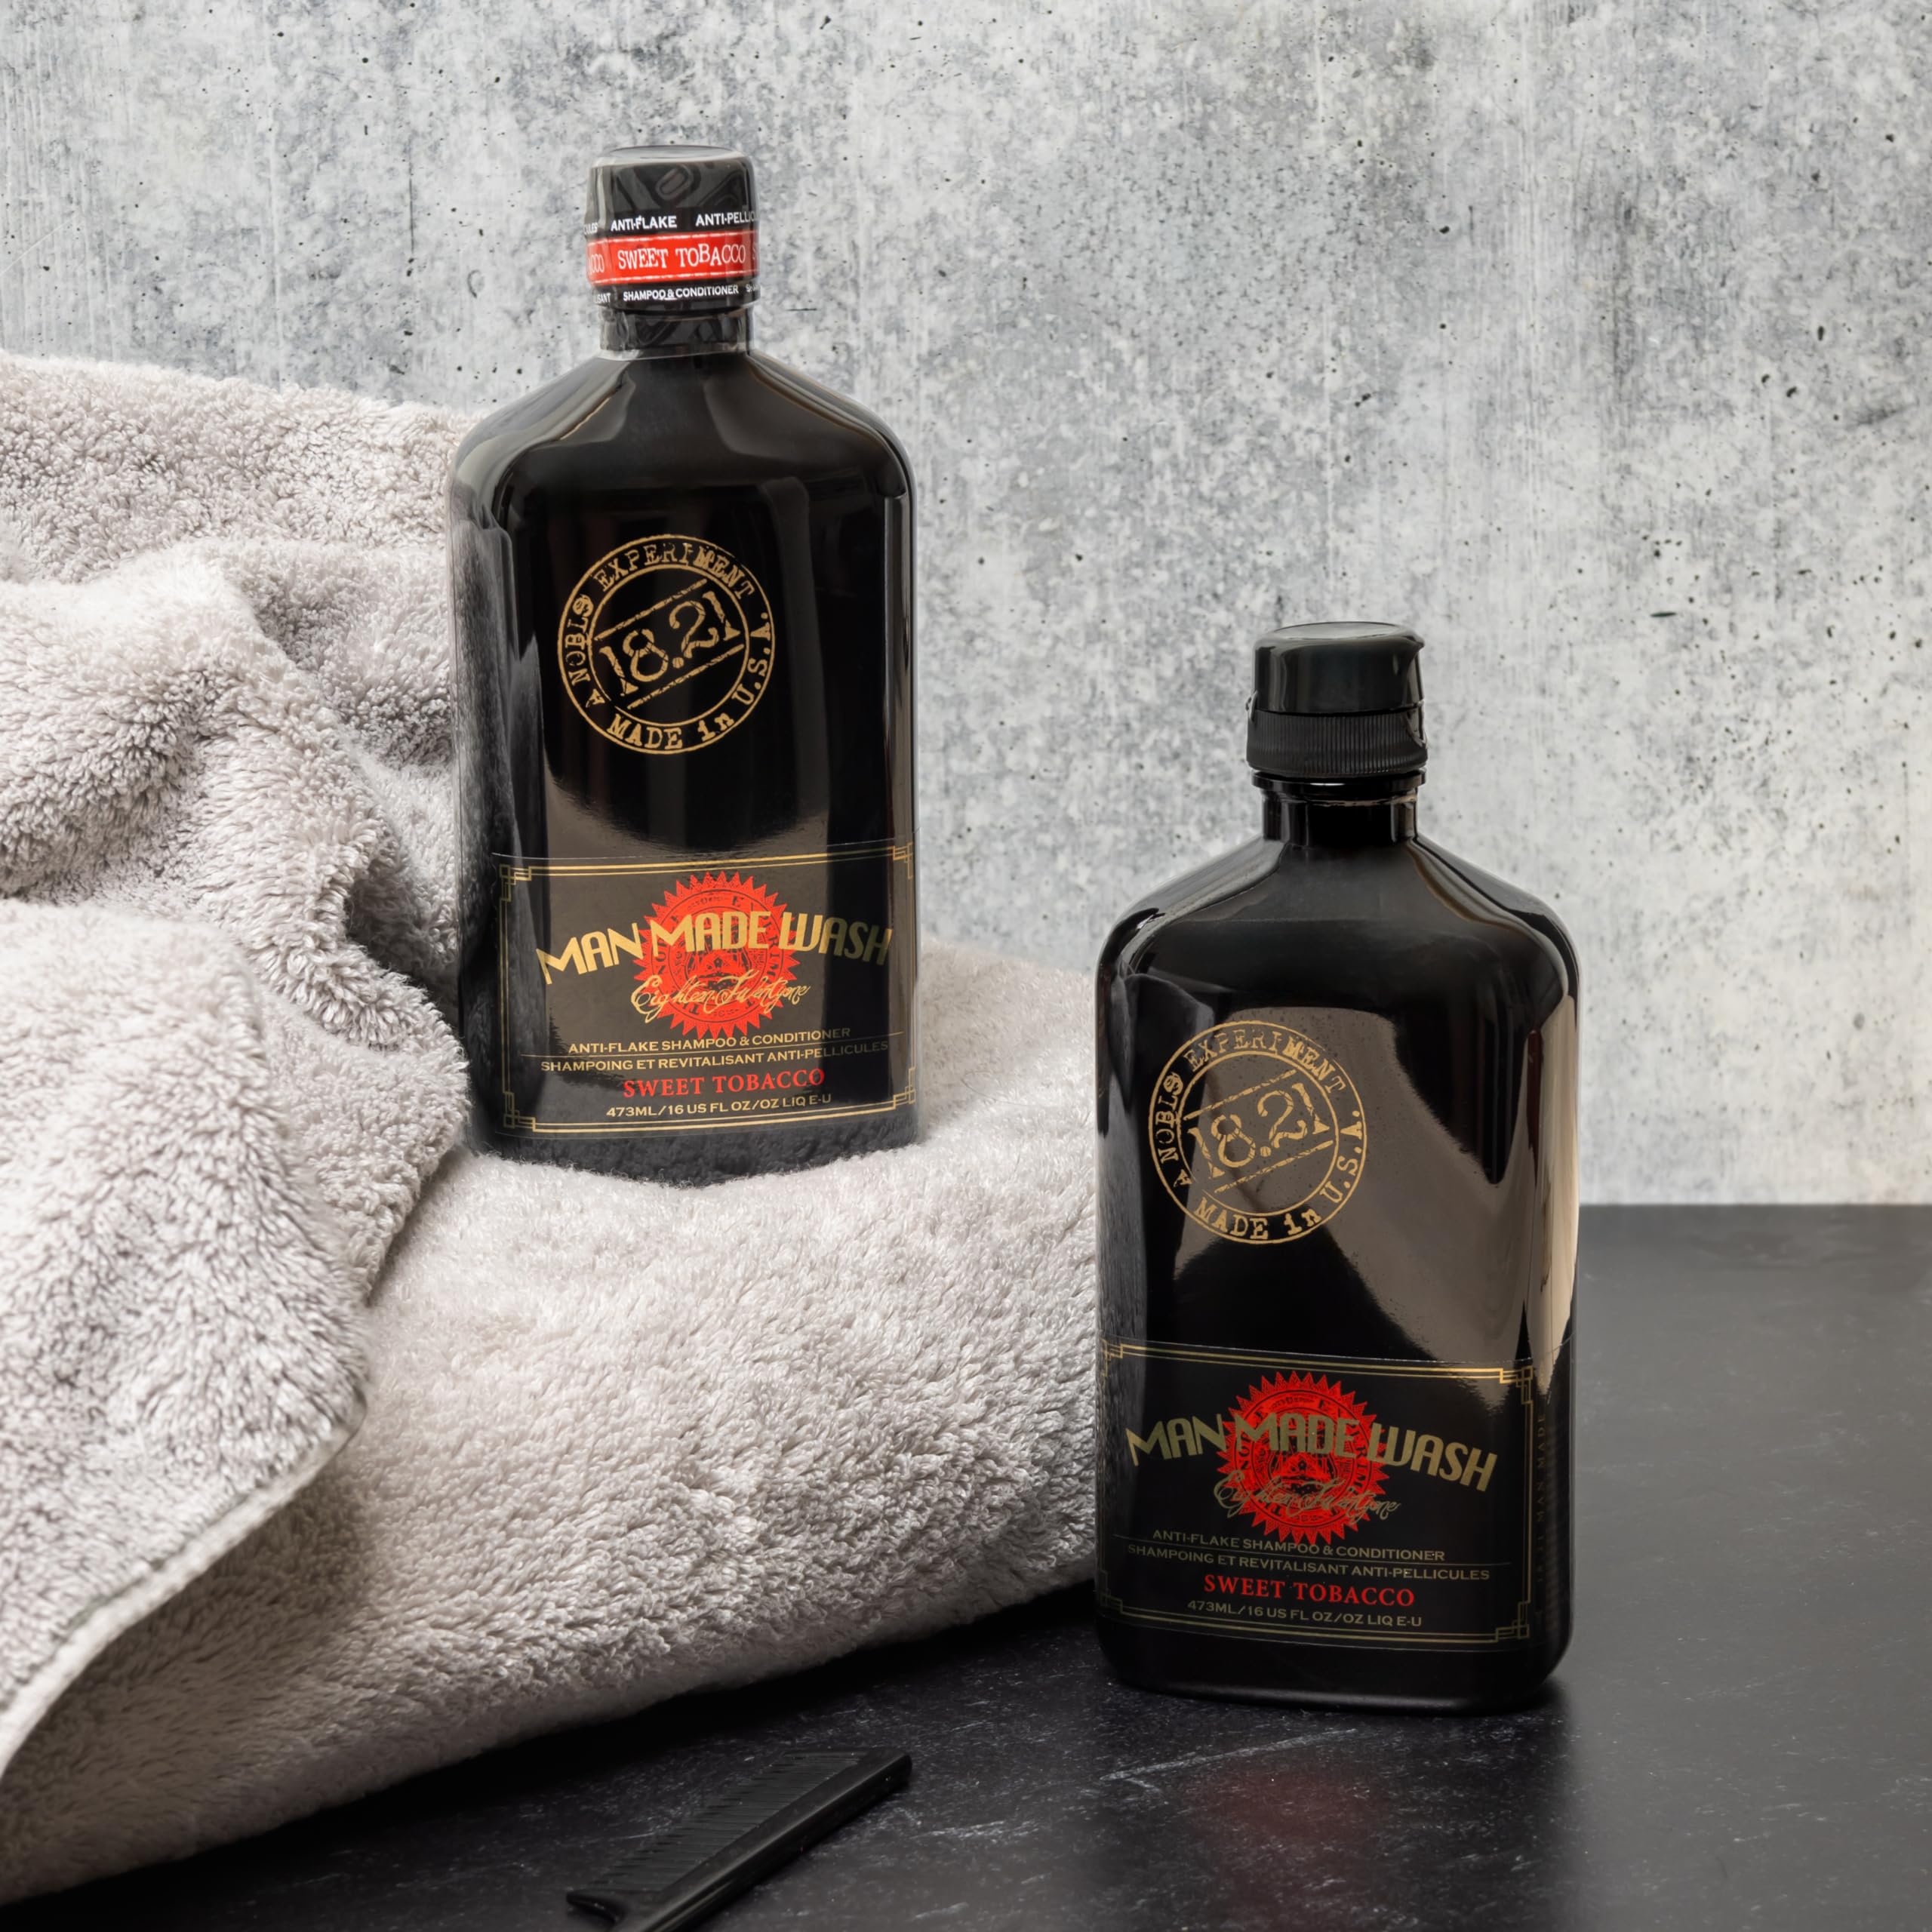 18.21 Man Made Anti-Flake 2-in-1 Shampoo & Conditioner in Sweet Tobacco: Hydrating Cleanse Helps Dry, Itchy, Flaky Scalp